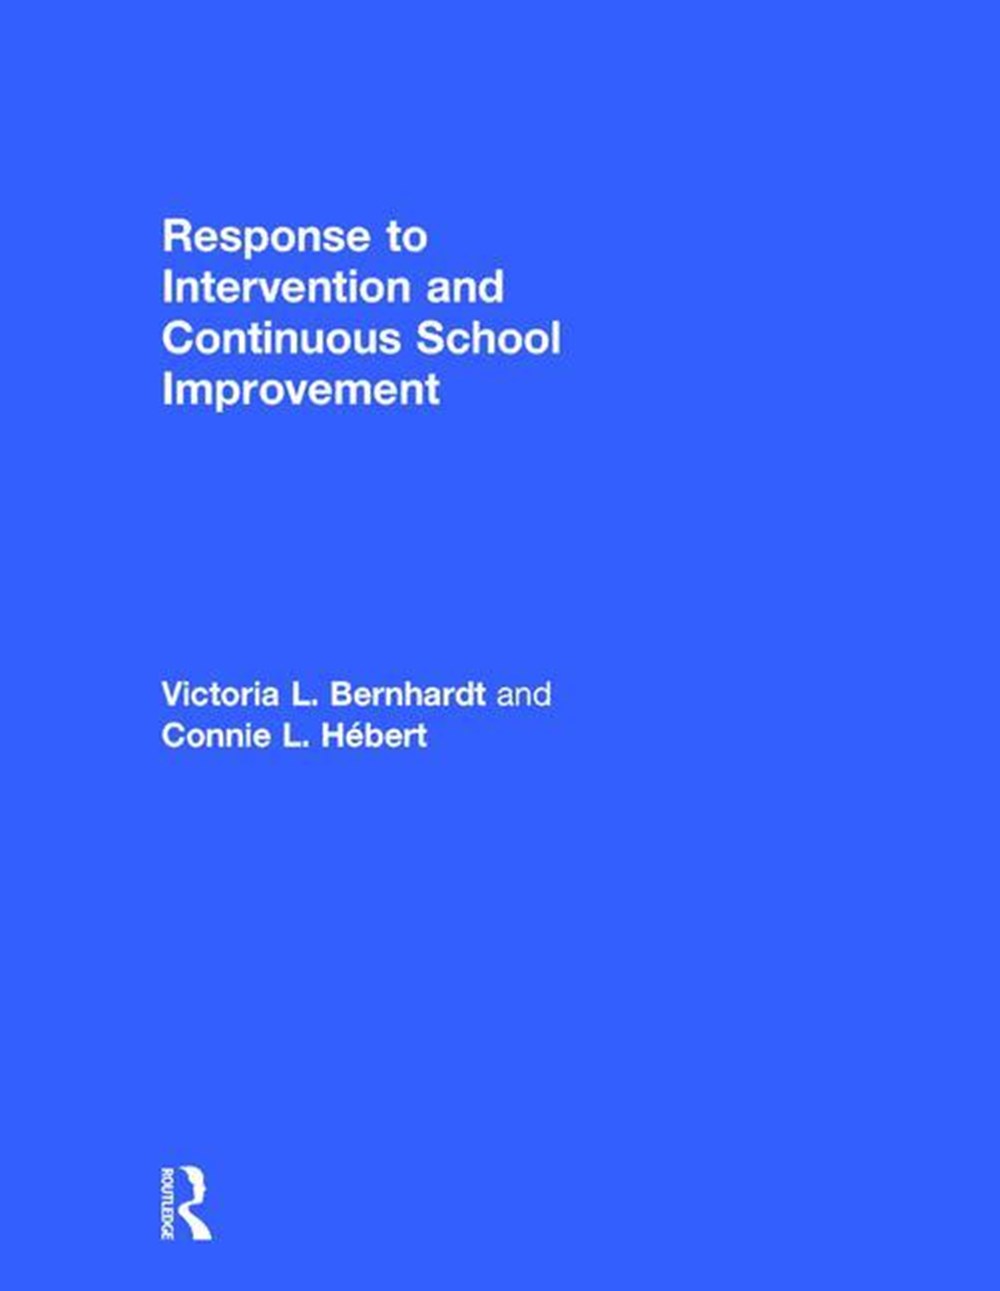 Response to Intervention and Continuous School Improvement: How to Design, Implement, Monitor, and E